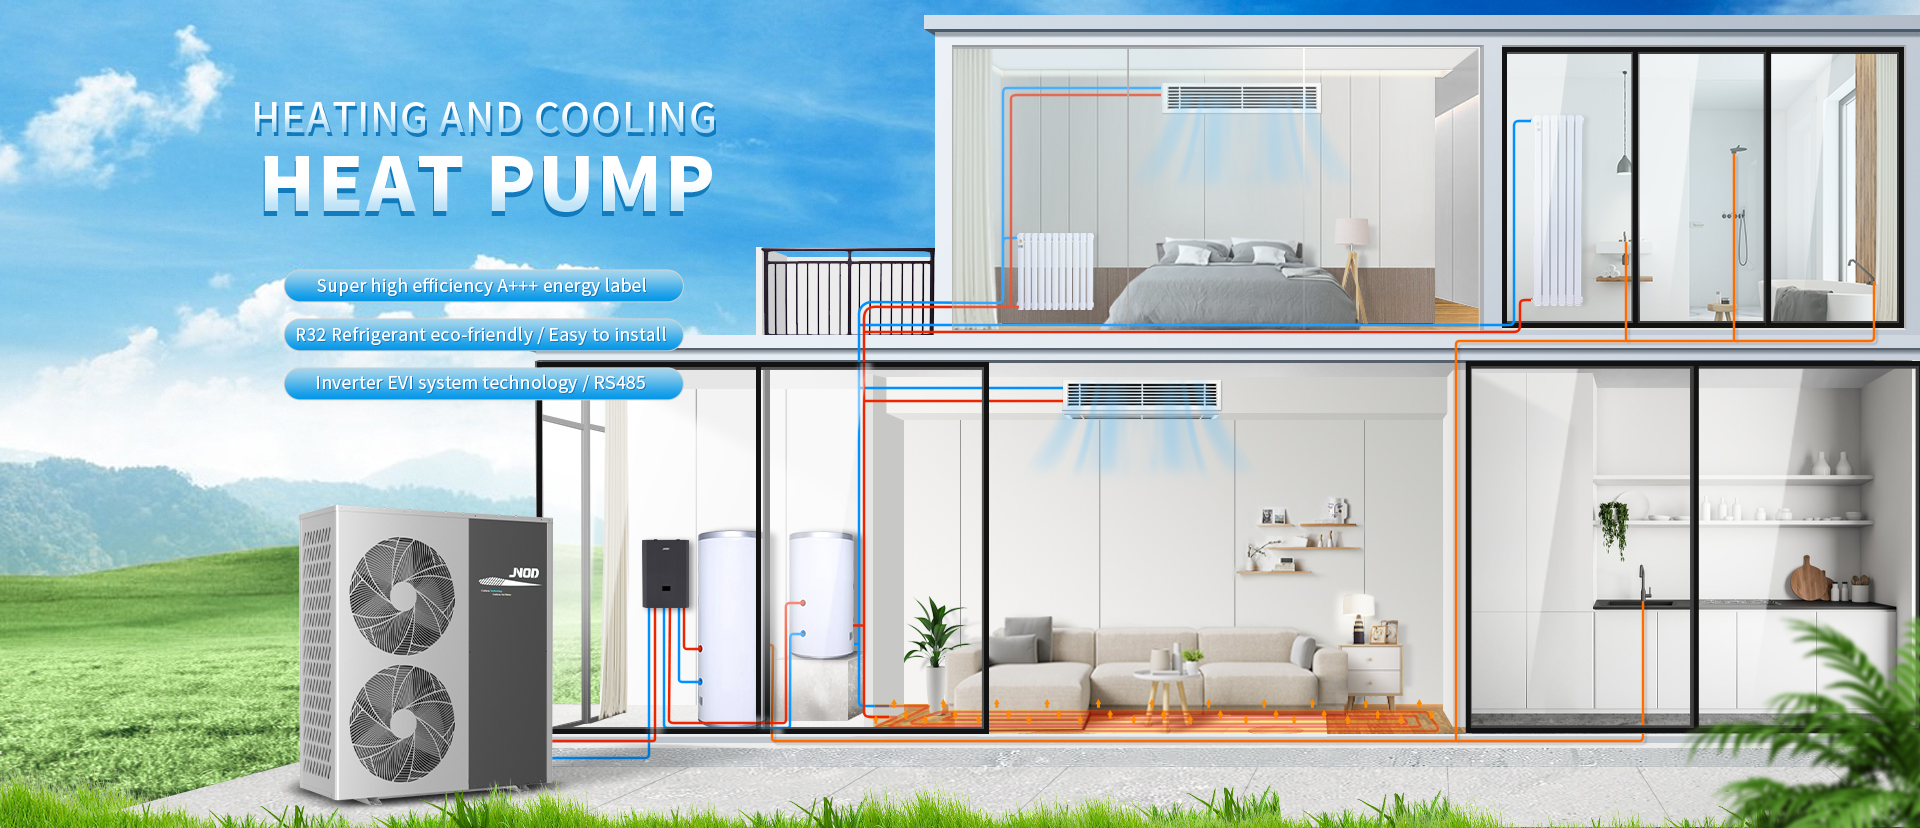 Heating And Cooling Heat Pump wholesale